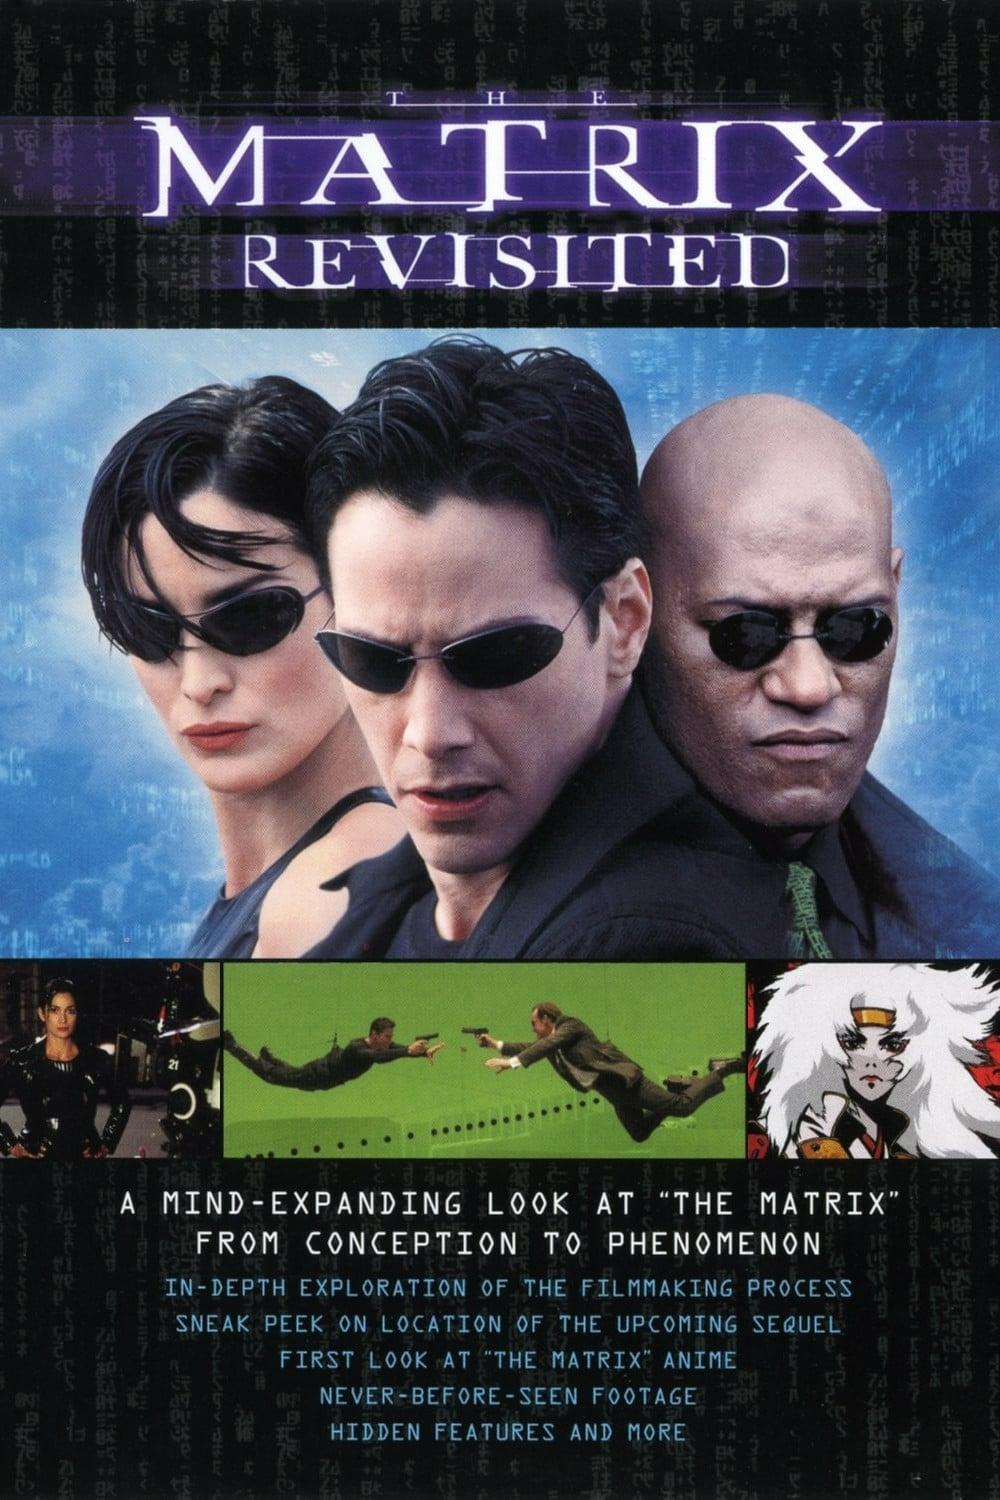 The Matrix Revisited poster